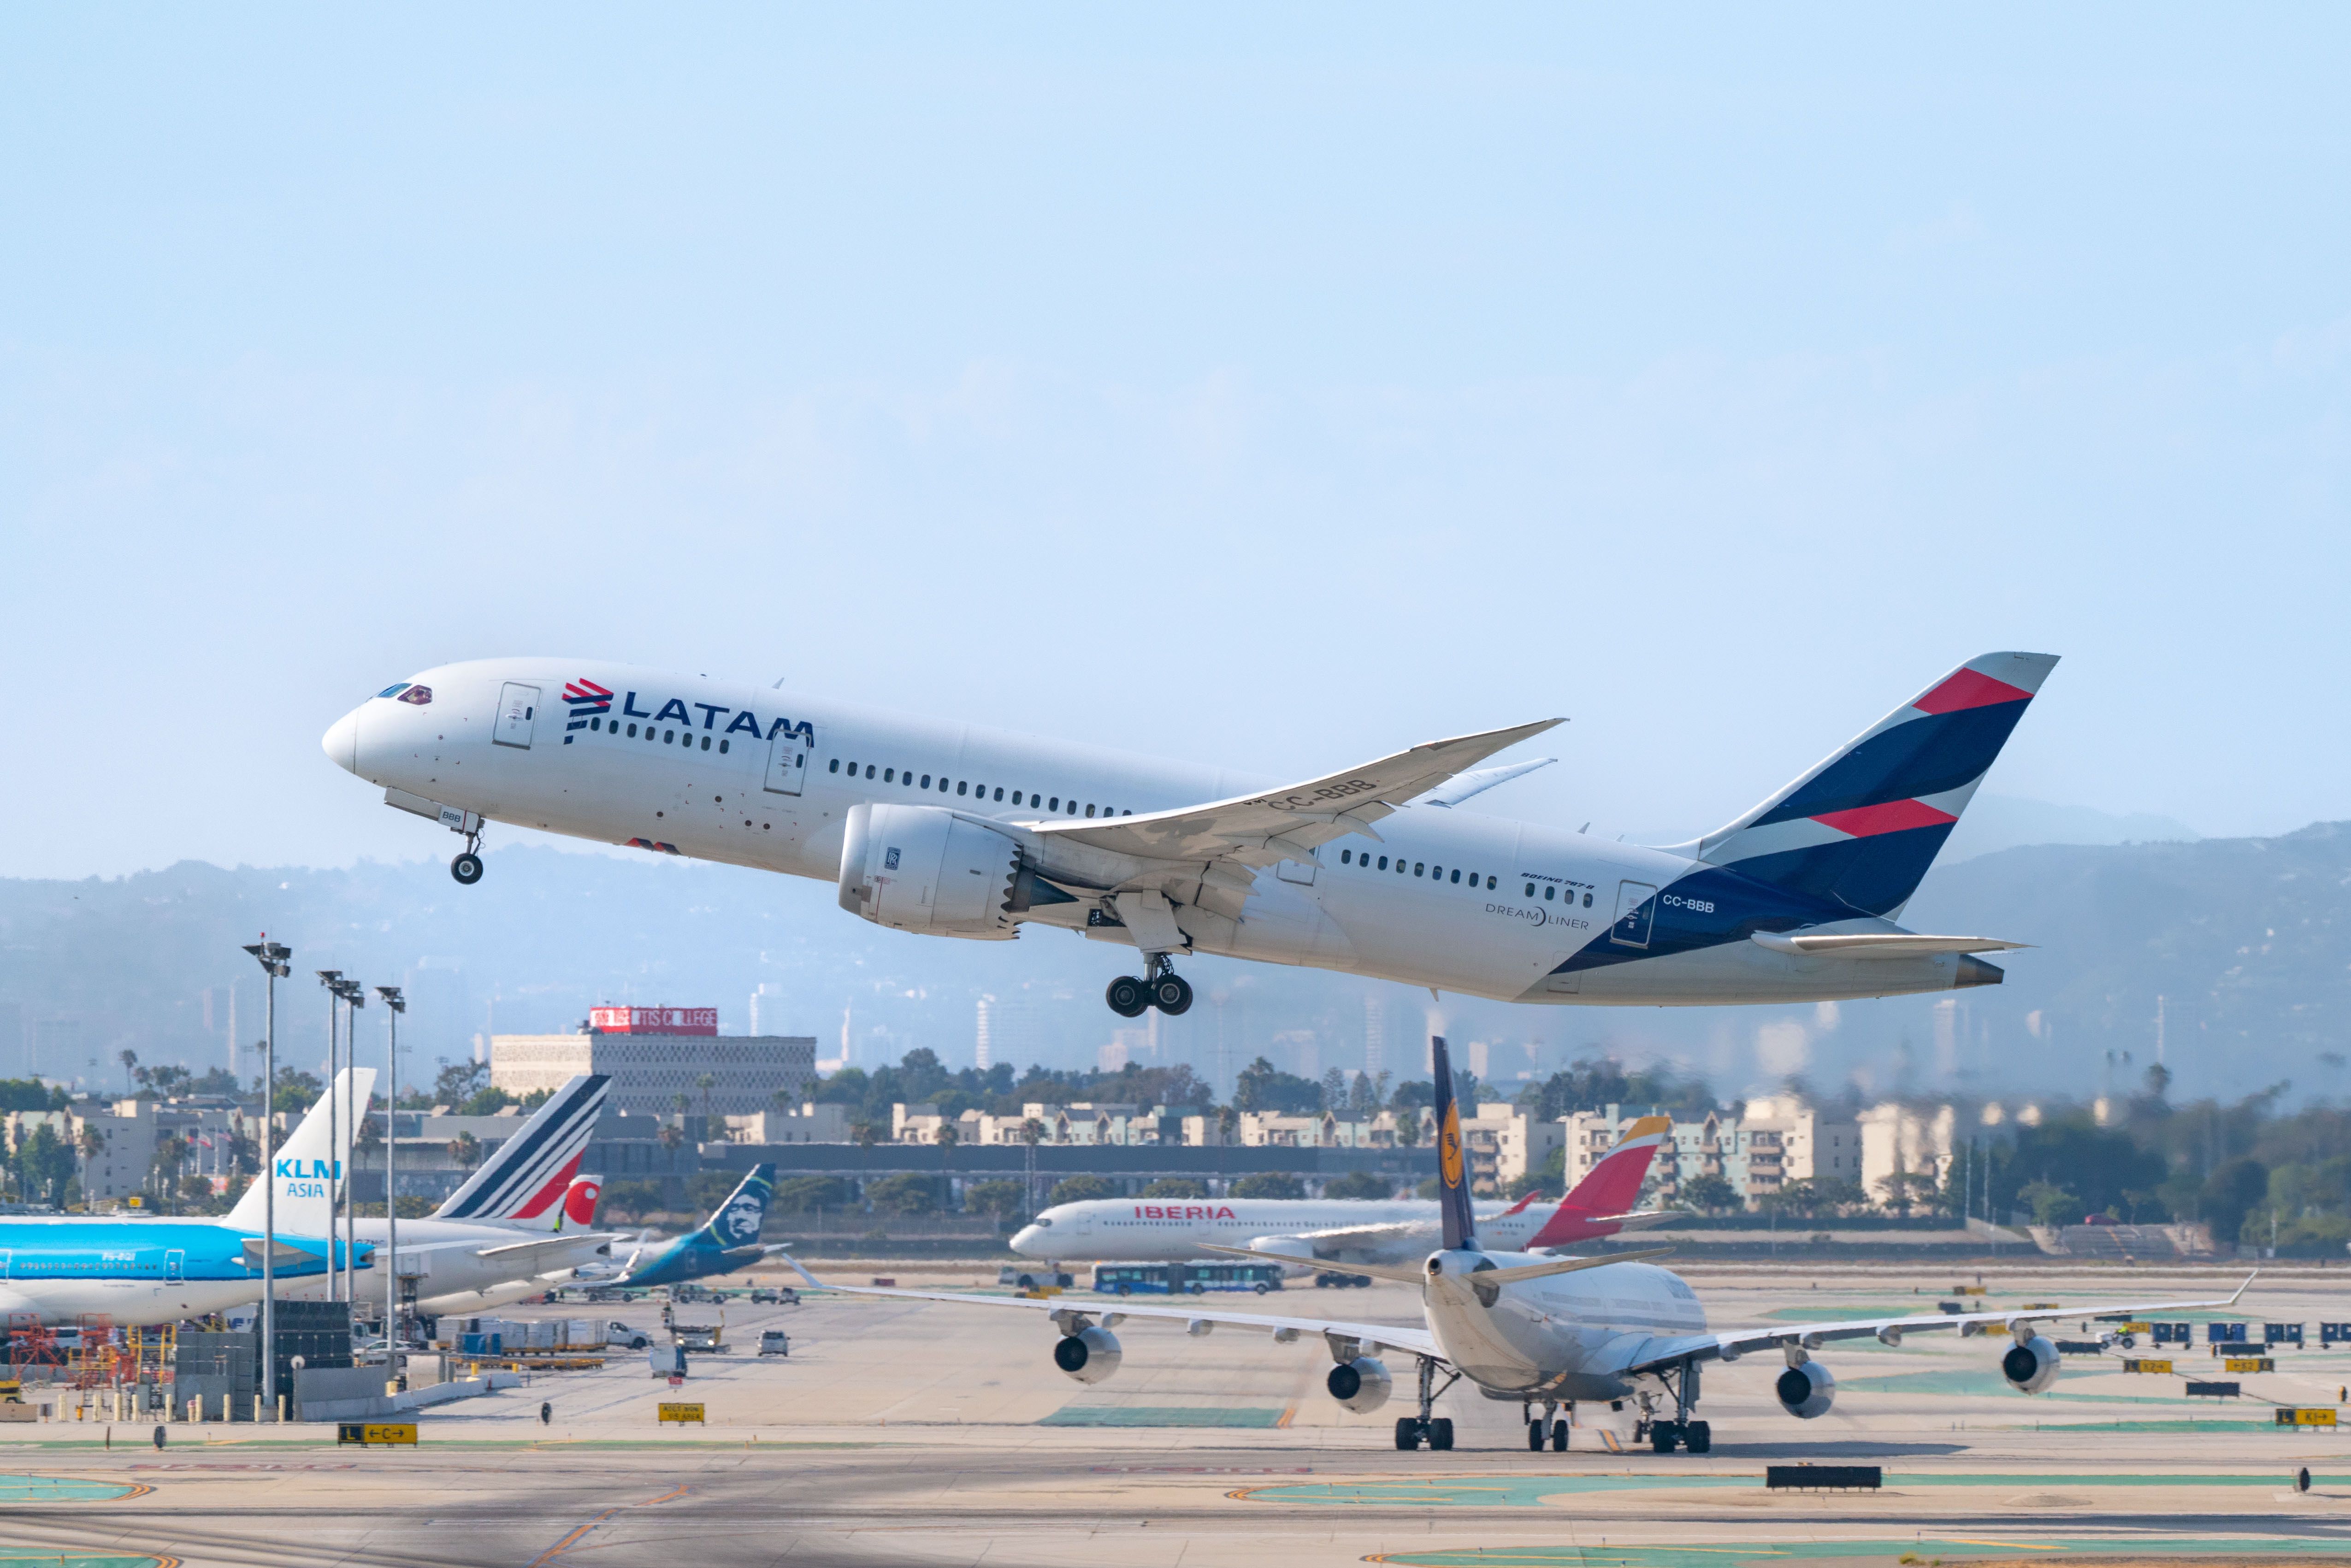 LATAM 'LAN Chile' Airlines Boeing 787-8 takes off from Los Angeles international Airport on July 30, 2022 in Los Angeles, California.